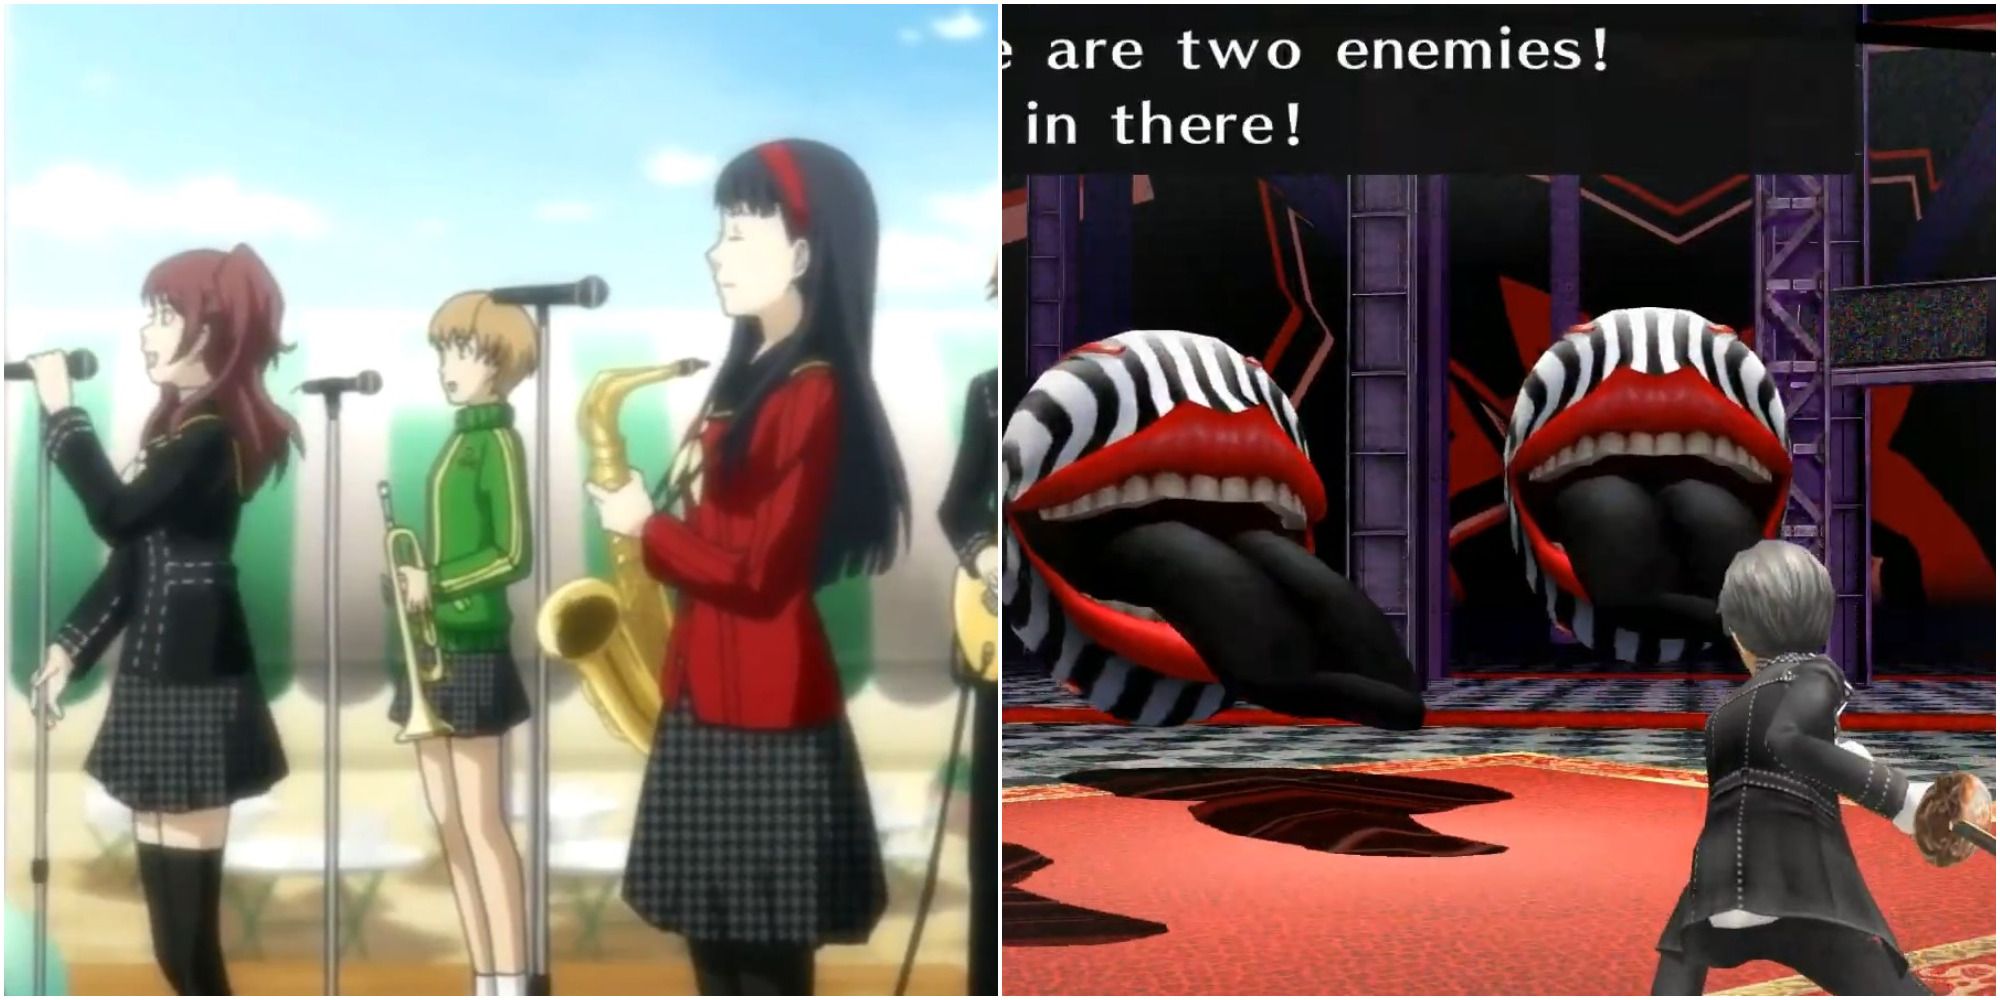 P4G Aged Well Feature Image